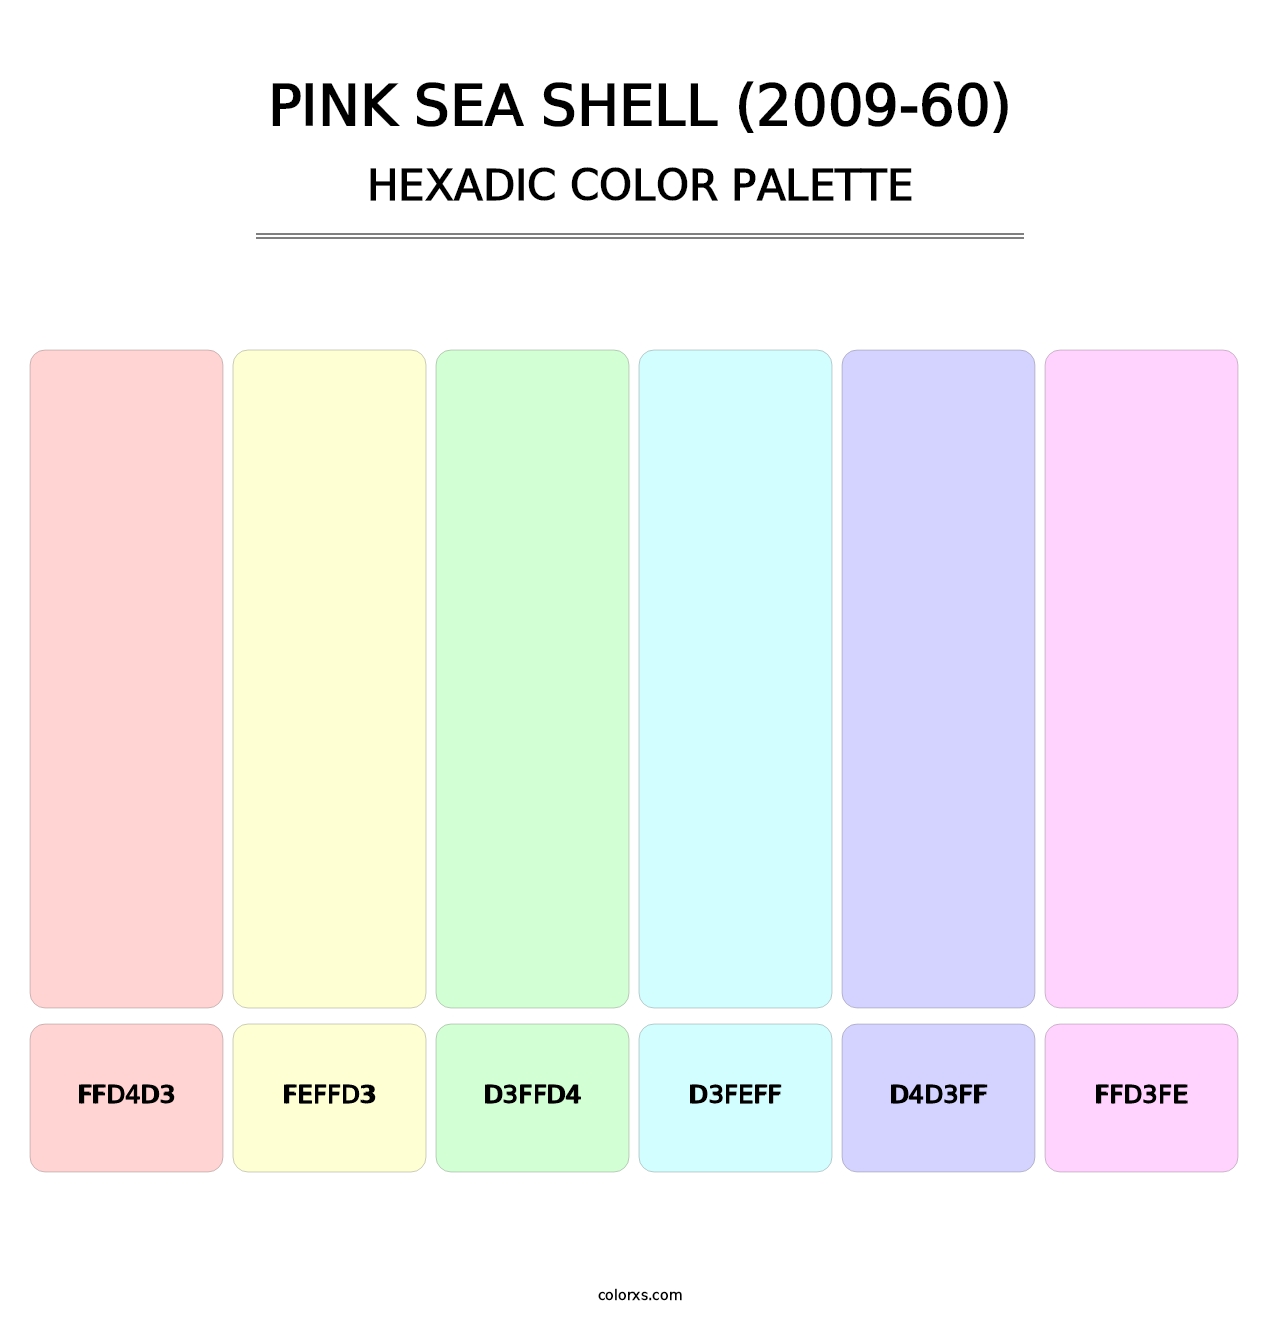 Pink Sea Shell (2009-60) - Hexadic Color Palette